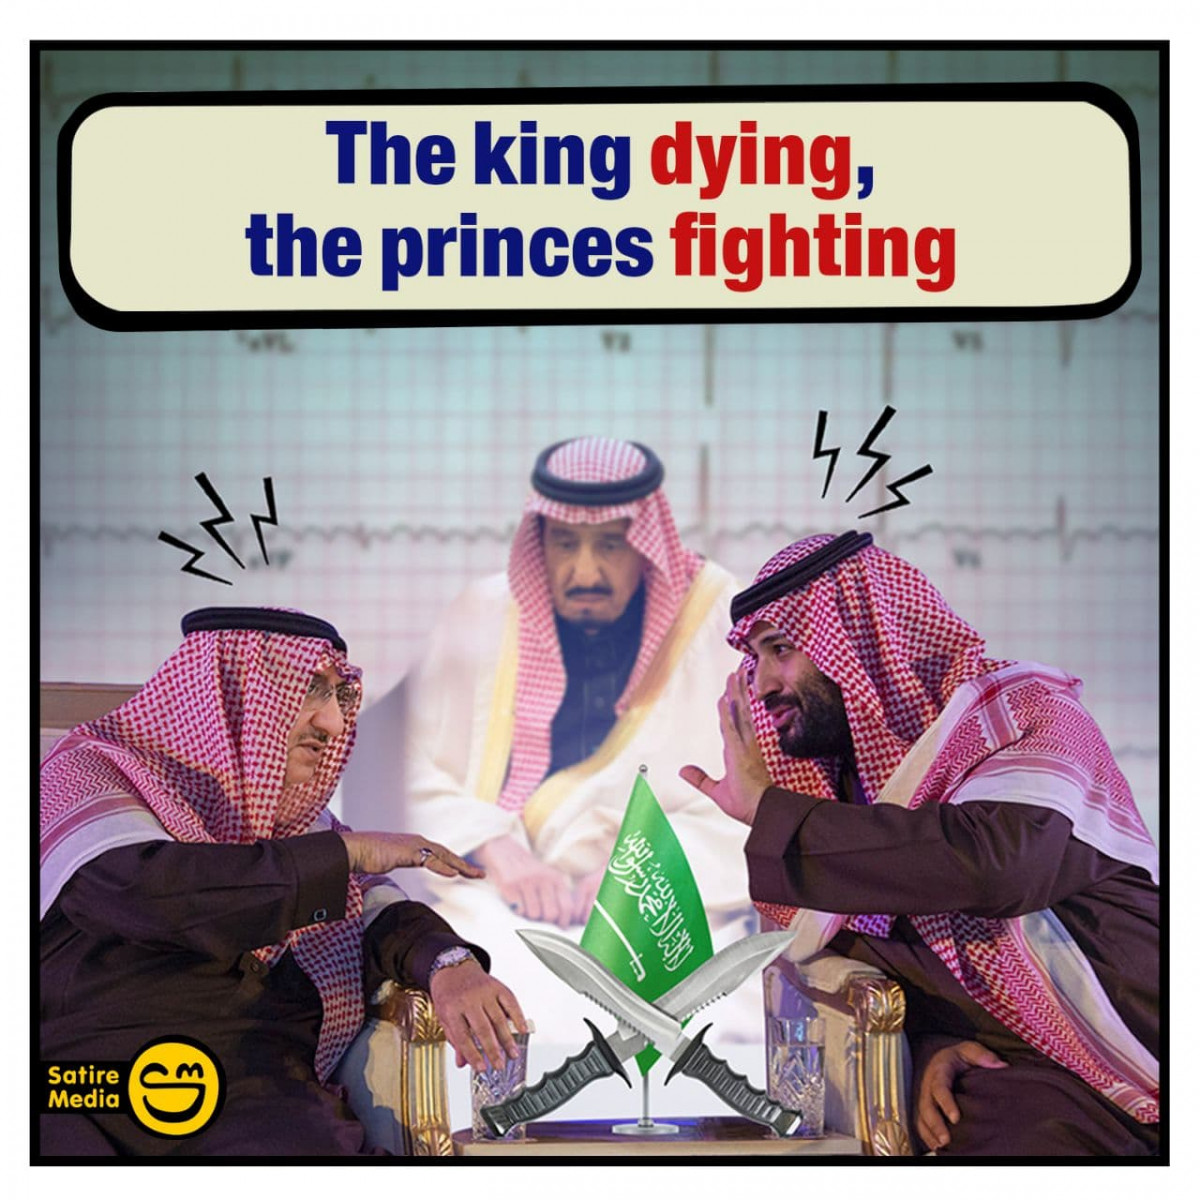 The king dying, the princes fighting